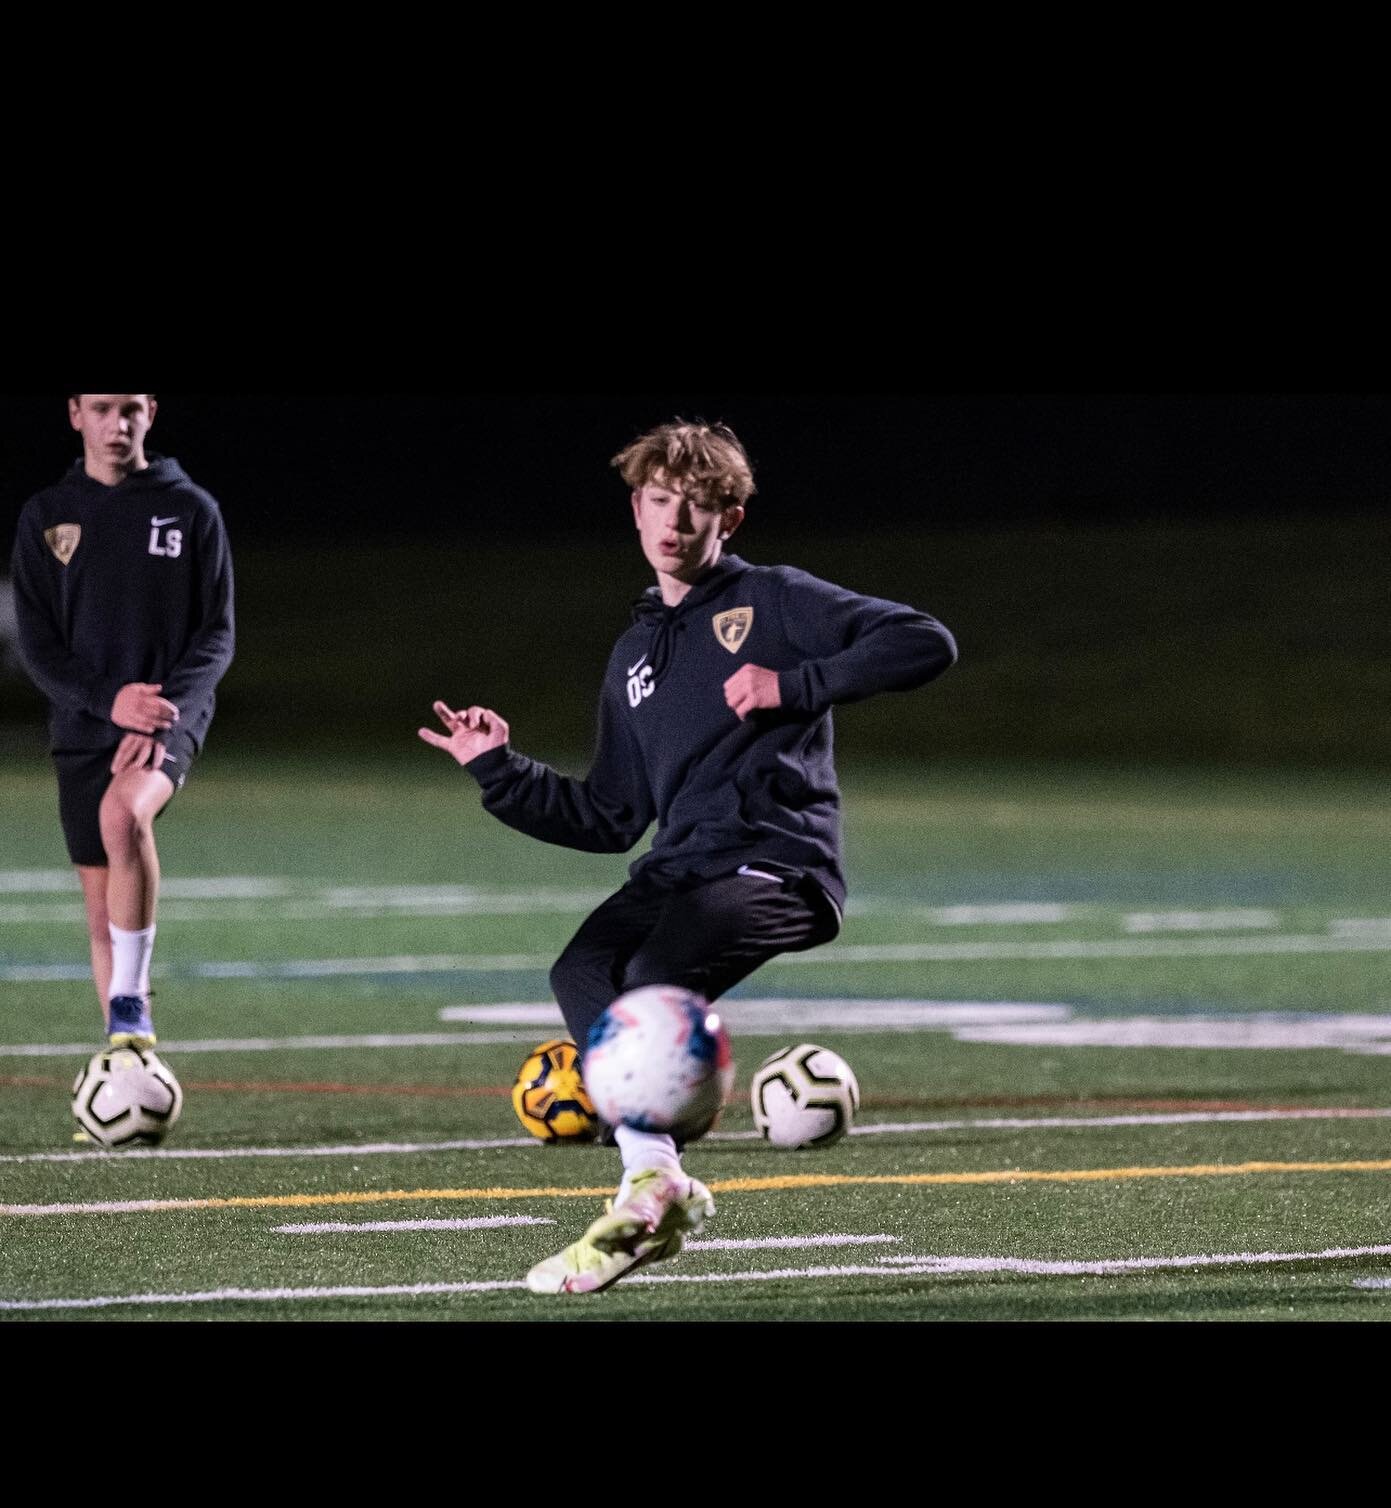 Happy 18th birthday to PDXFA athlete @owen.swartout We all wish you a Happy Birthday and hope that you have an amazing day! 🎂⚽️